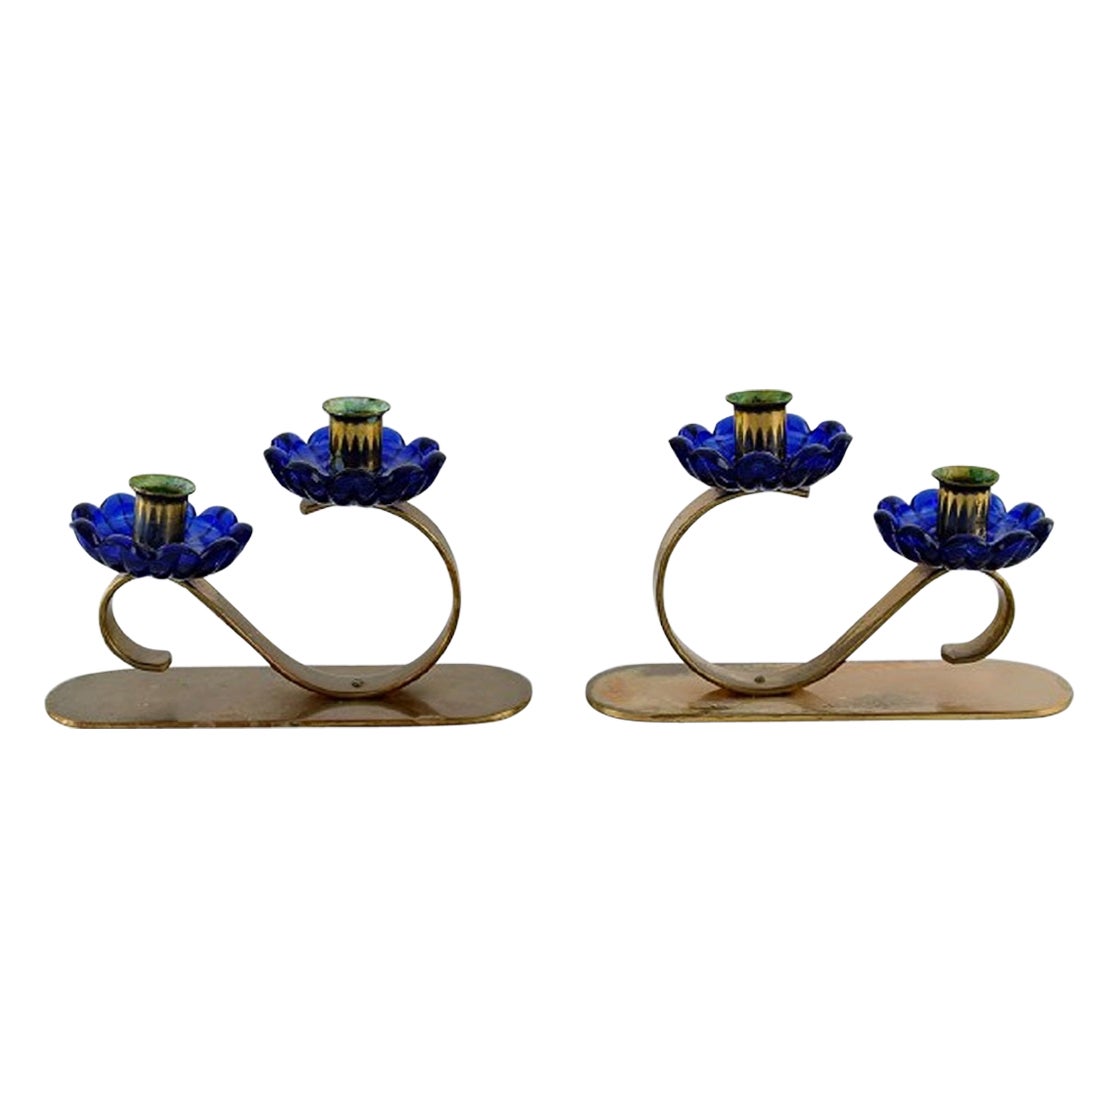 Gunnar Ander for Ystad Metall, Two Candlesticks in Brass and Blue Art Glass